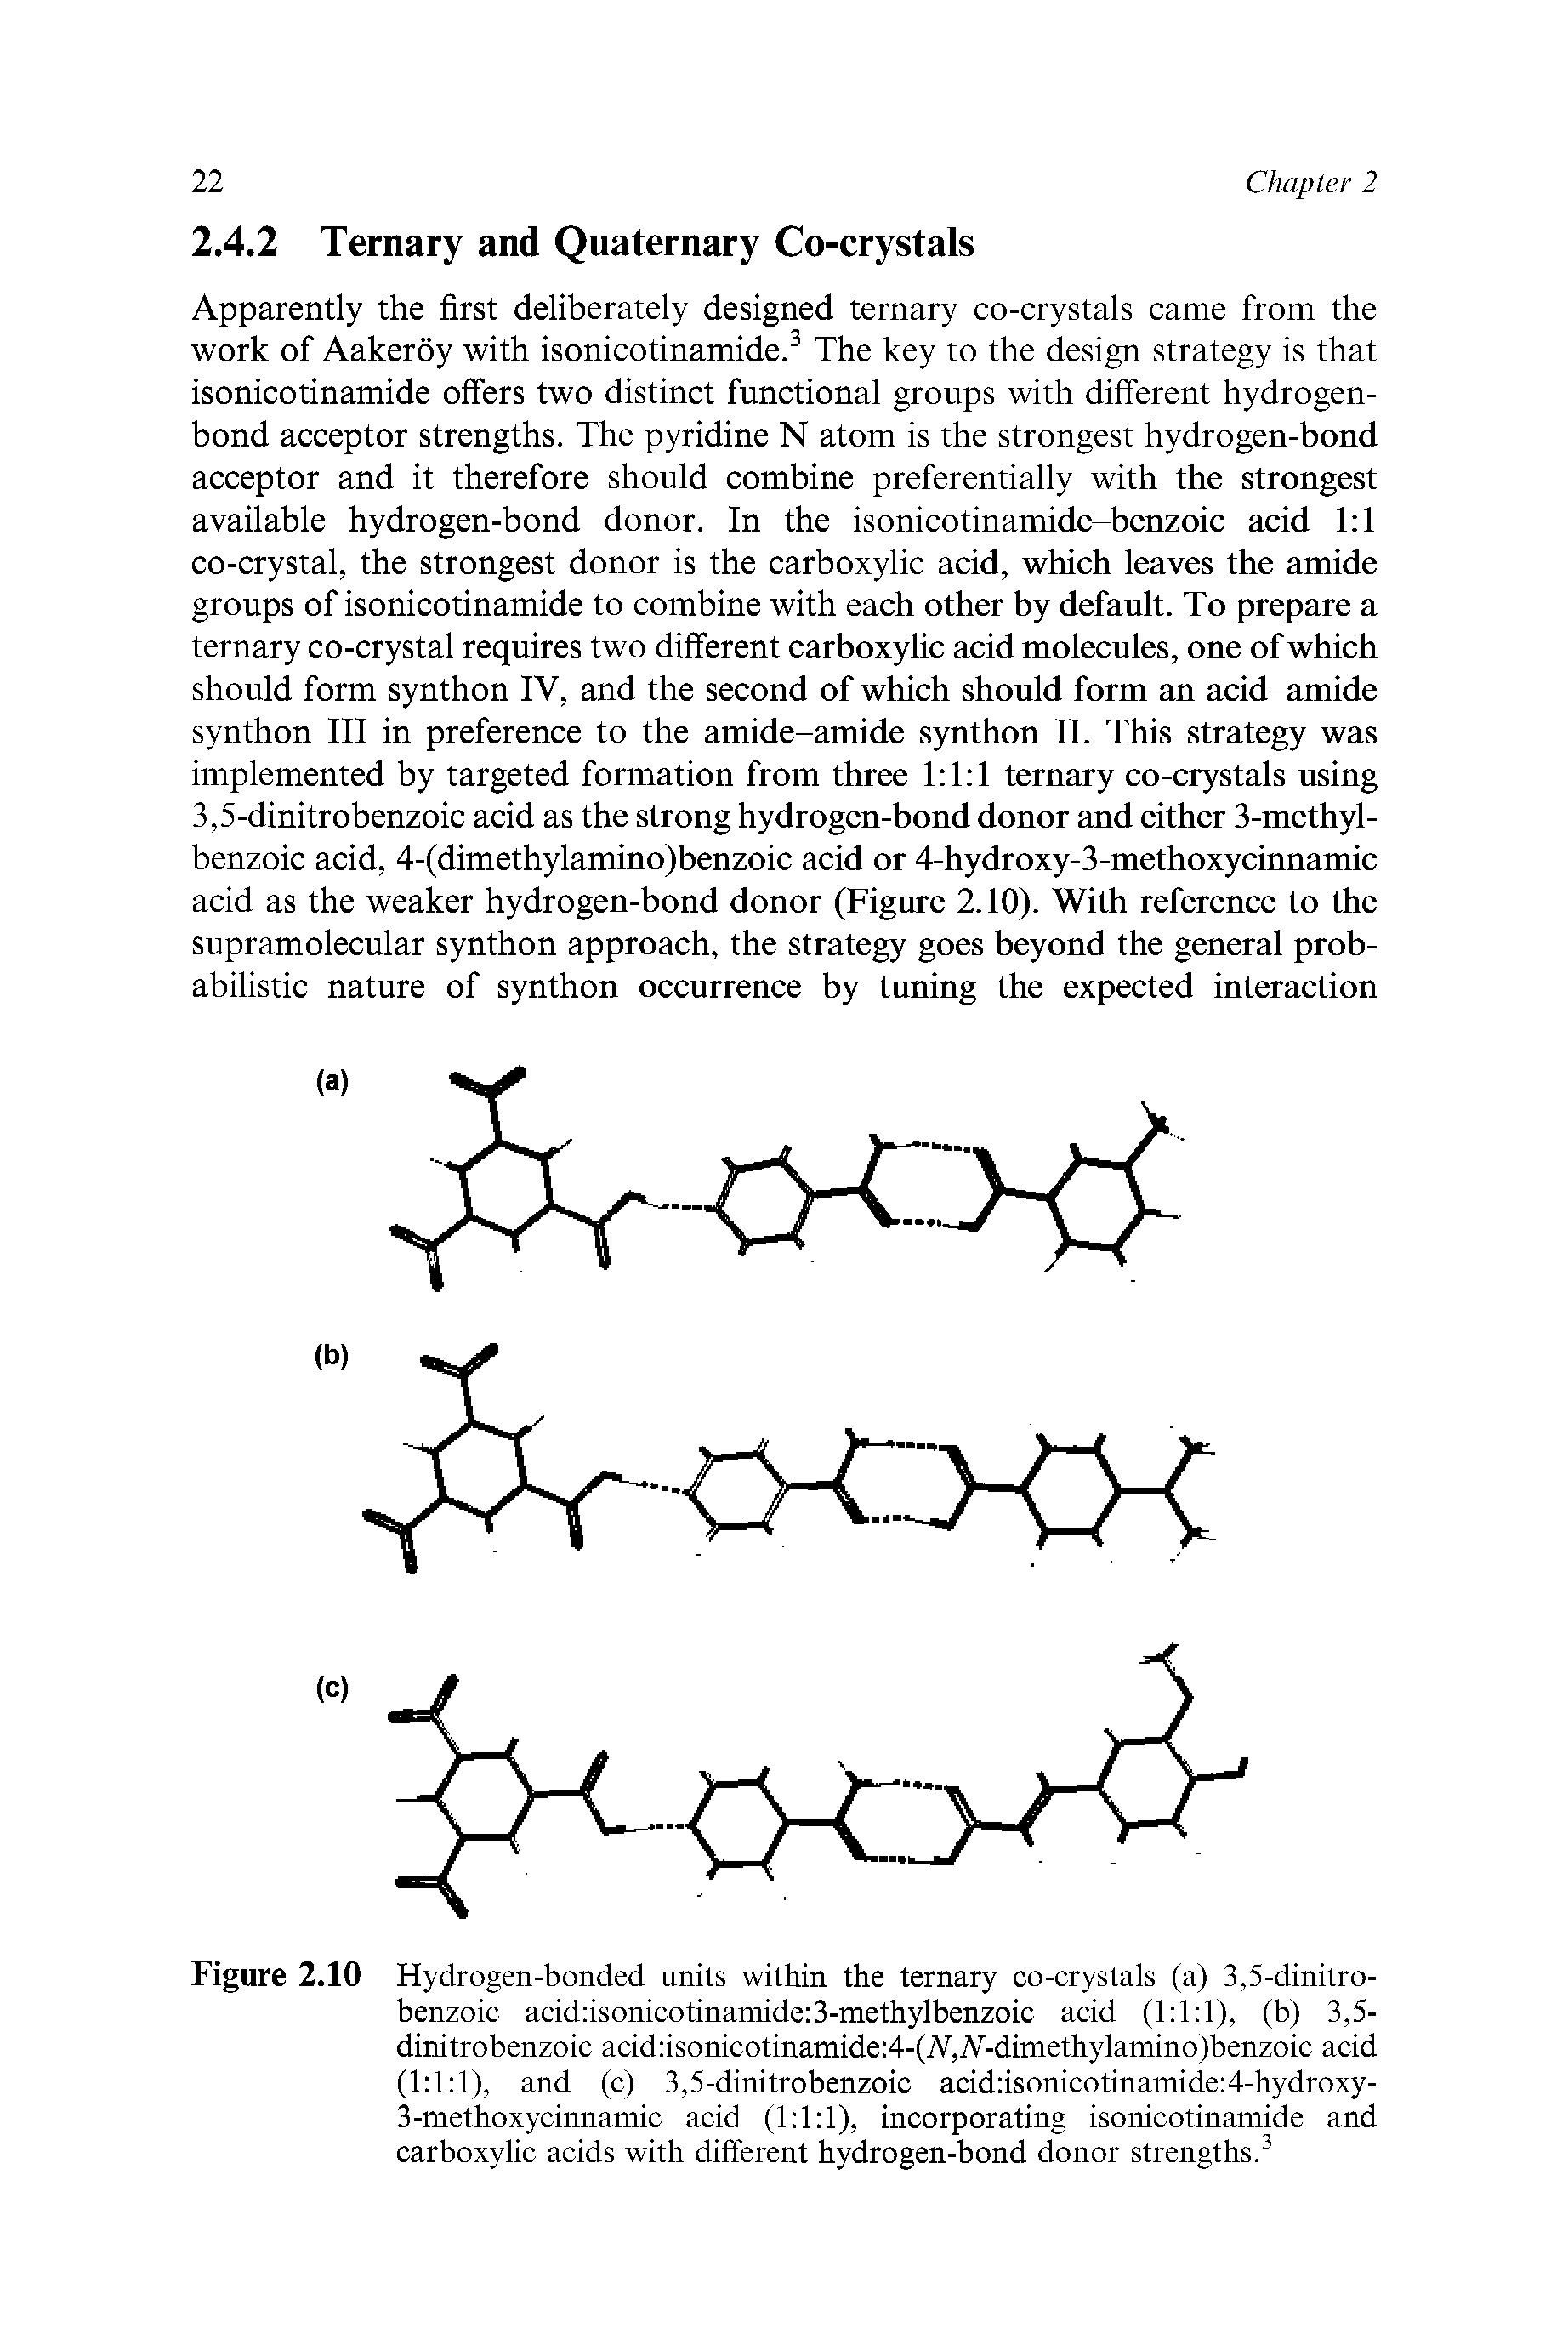 Figure 2.10 Hydrogen-bonded units within the ternary co-crystals (a) 3,5-dinitro-benzoic acid isonicotinamide 3-methylbenzoic acid (1 1 1), (b) 3,5-dinitrobenzoic acid isonicotinamide 4-(V,iV-dimethylamino)benzoic acid (1 1 1), and (c) 3,5-dinitrobenzoic acid isonicotinamide 4-hydroxy-3-methoxycinnamic acid (1 1 1), incorporating isonicotinamide and carboxylic acids with different hydrogen-bond donor strengths. ...